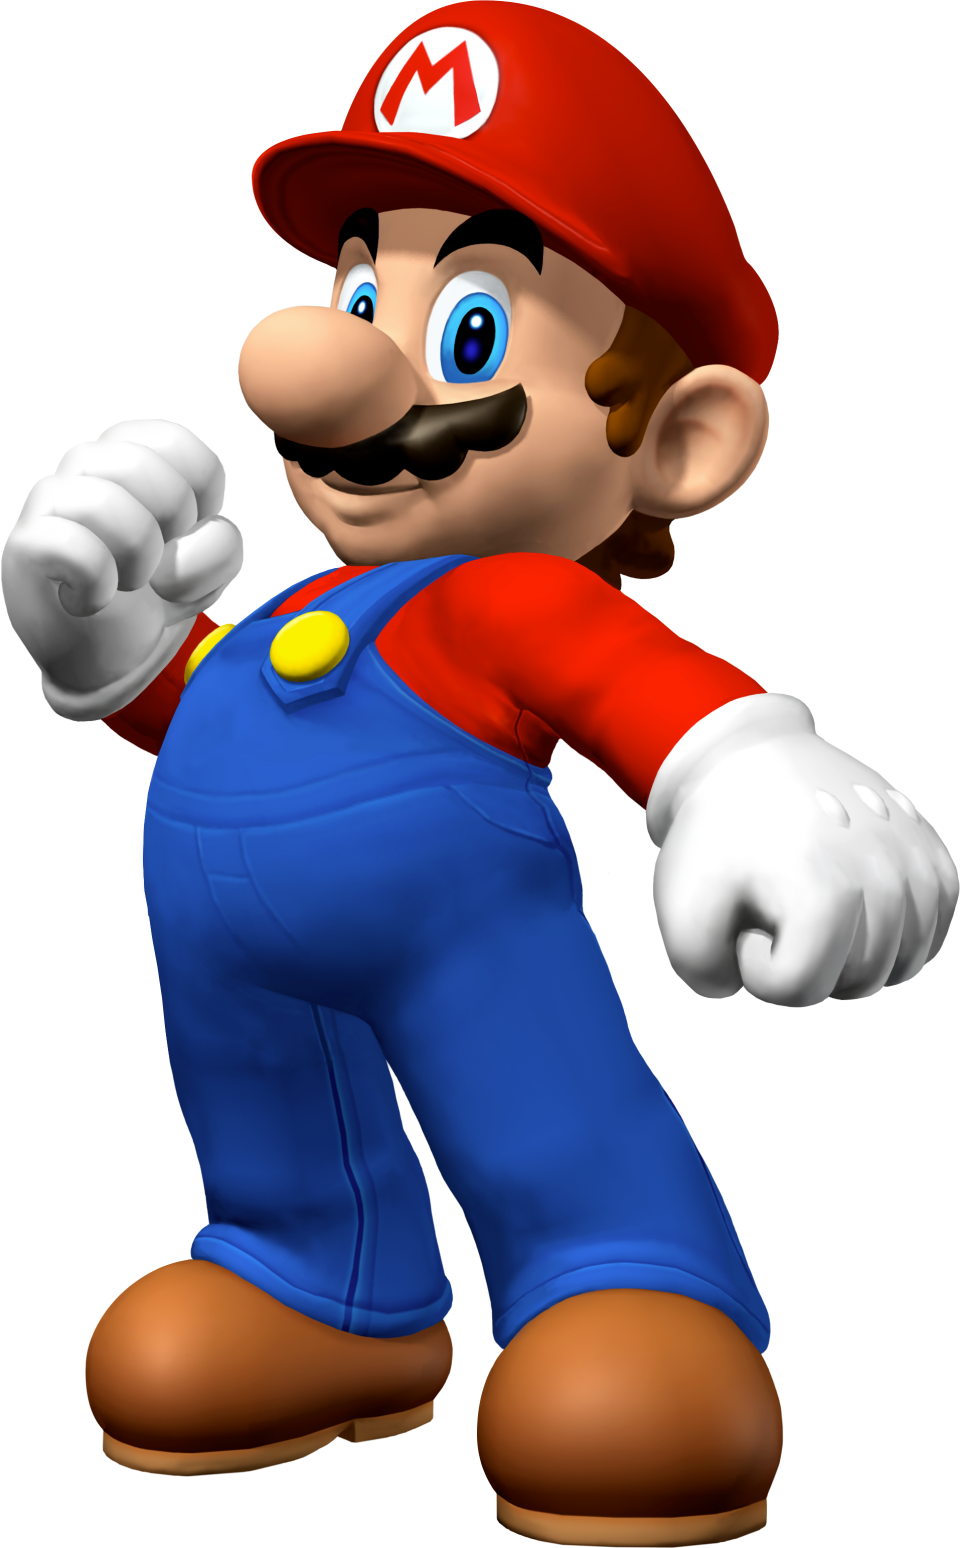 Mario PNG Image - PurePNG | Free transparent CC0 PNG Image Library